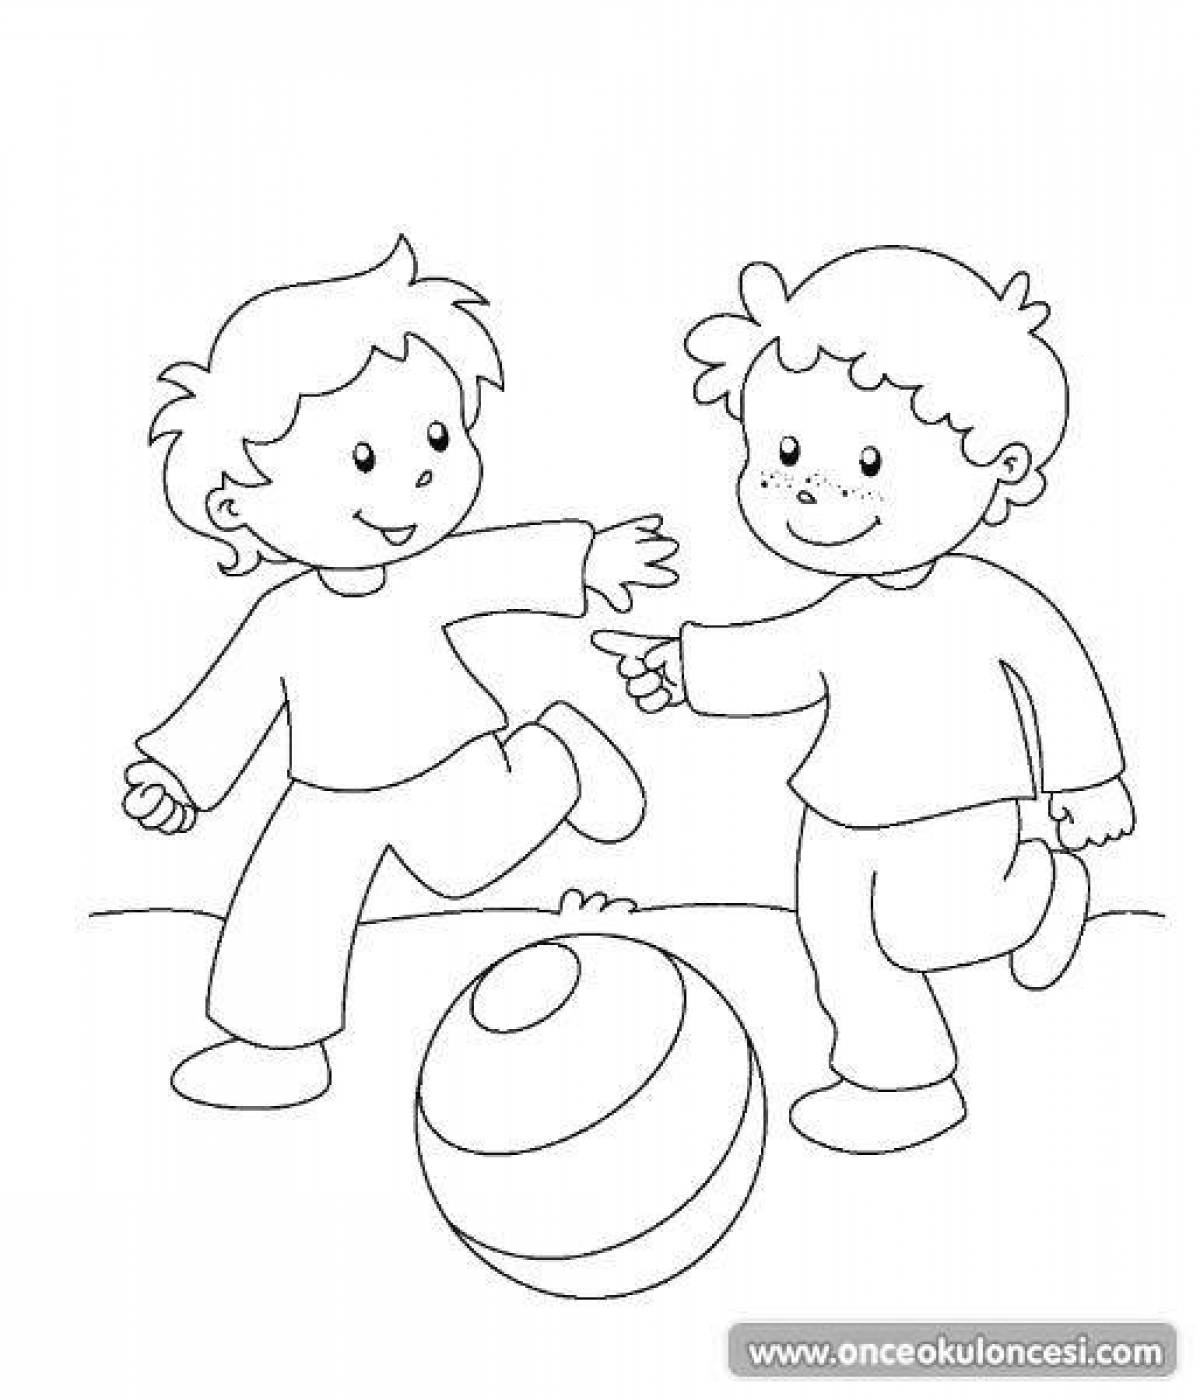 Glowing children play coloring page